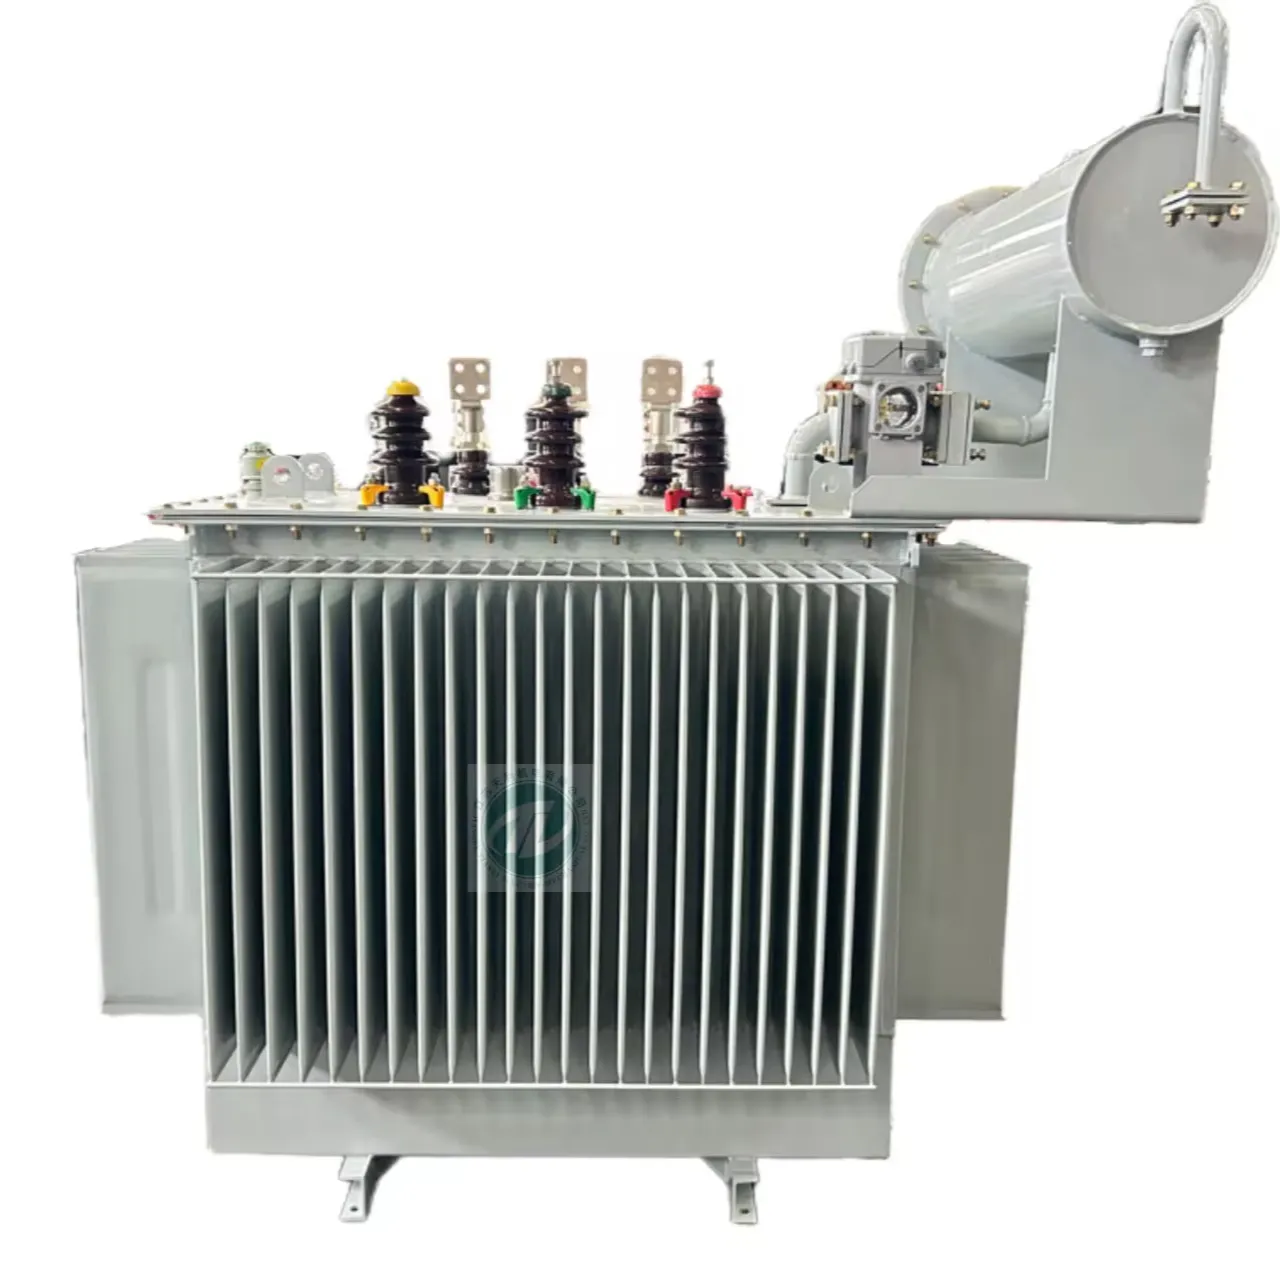 power transformer electrical equipment inverter electrical transformer 3150KVA Energy saving mv hv transformers for factory